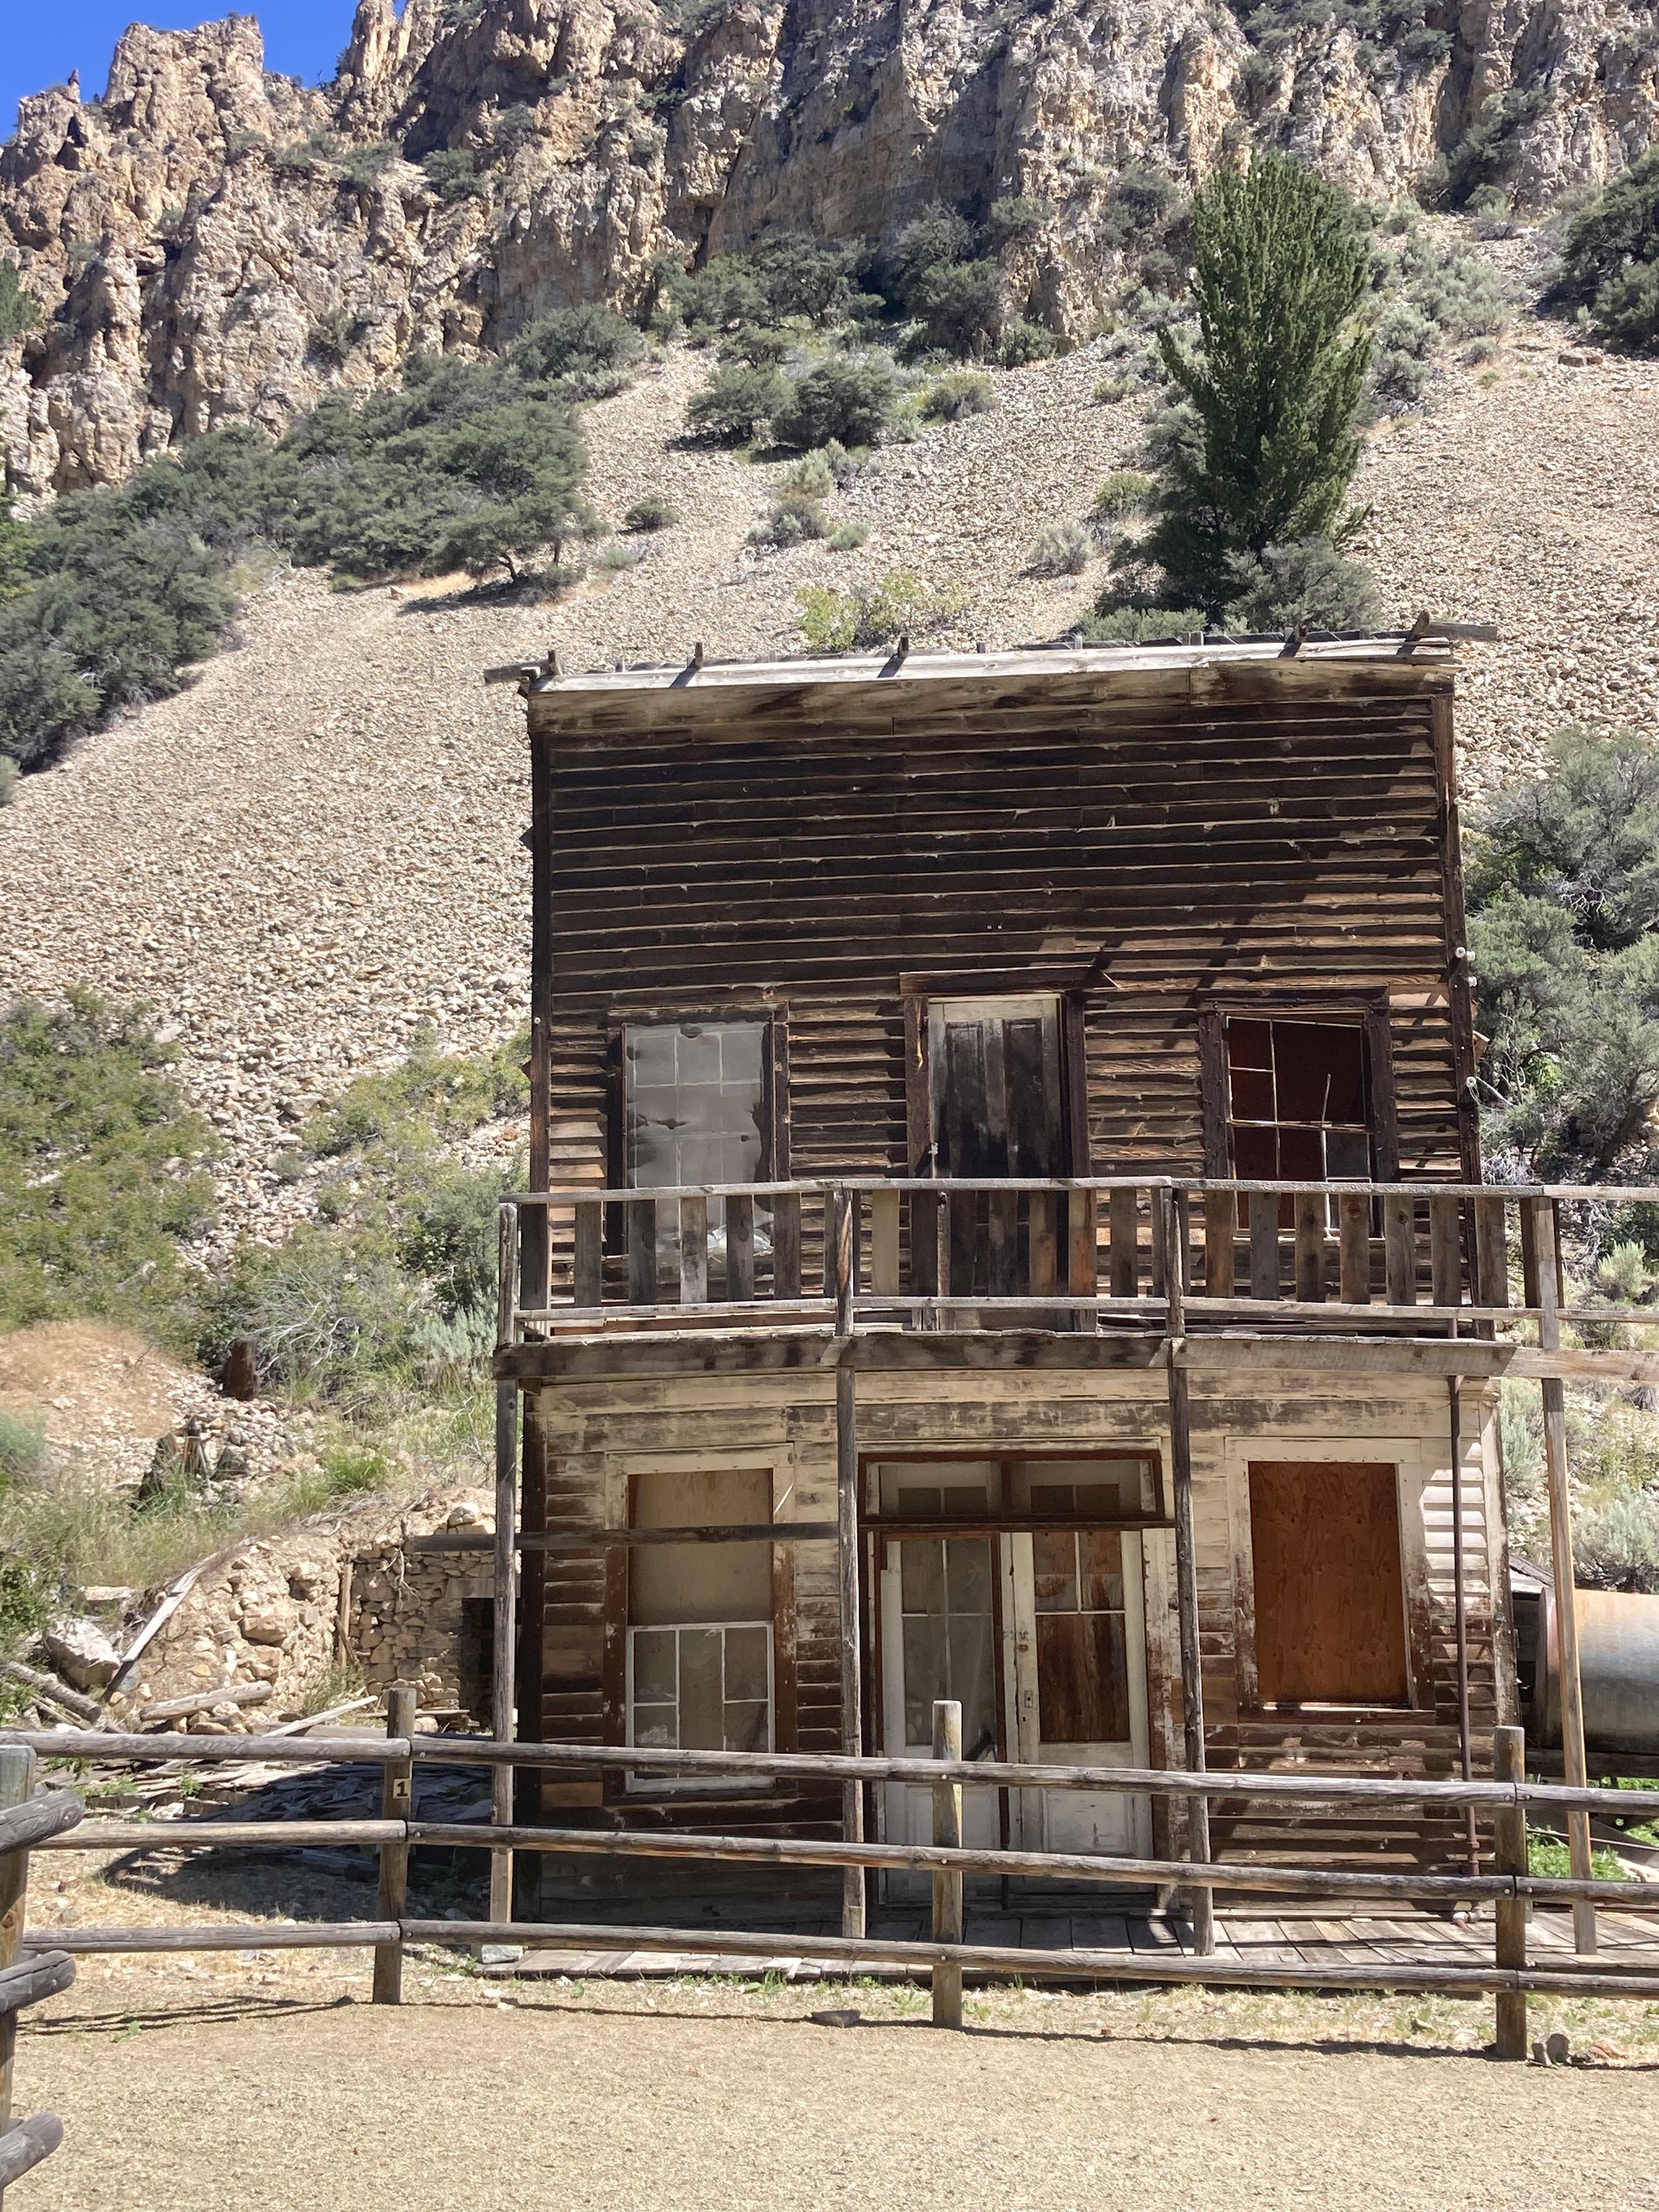 1800s-era building in a ghost town.